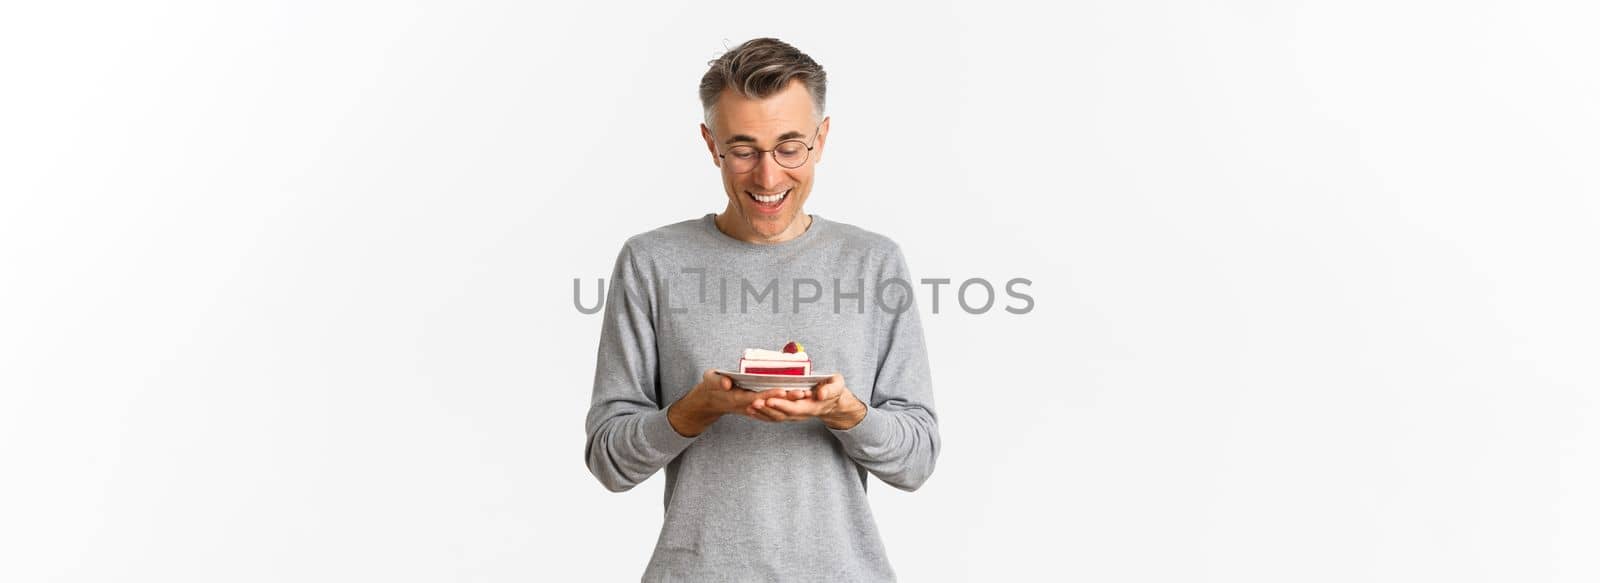 Portrait of handsome middle-aged man, looking happy at delicious cake, standing over white background.